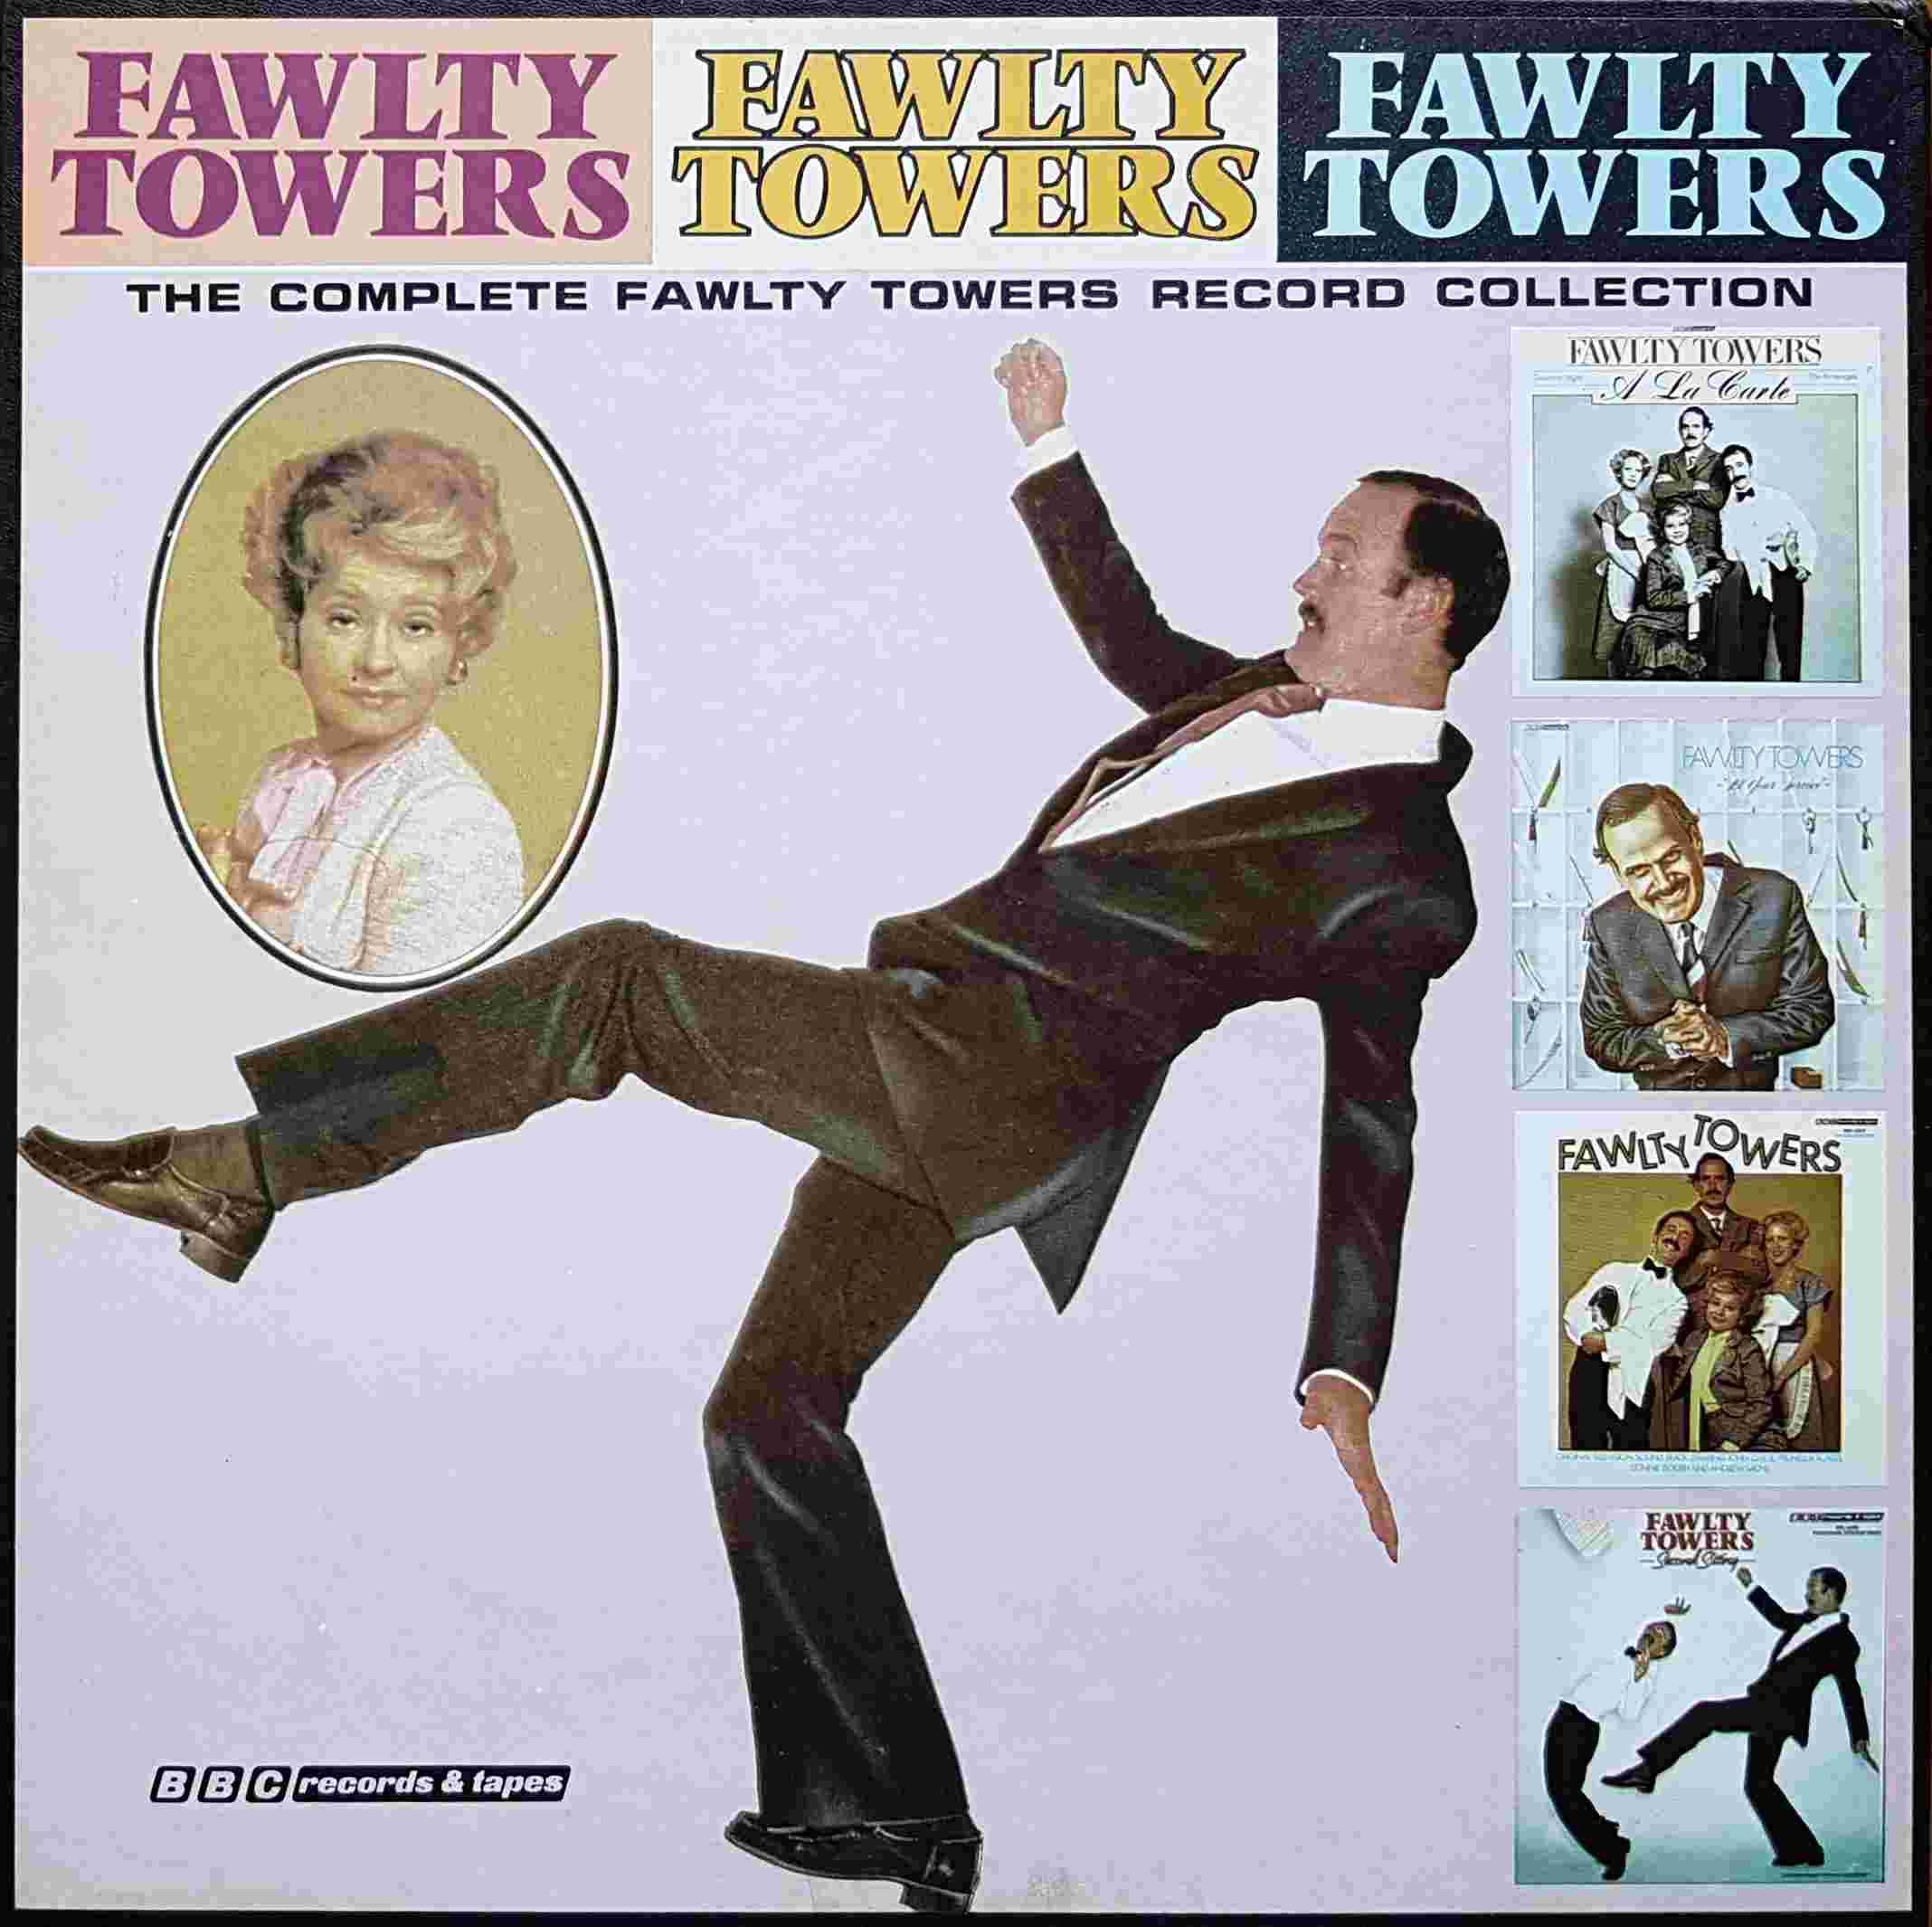 Picture of The Complete Fawlty Towers Record Collection by artist John Cleese / Connie Booth from the BBC albums - Records and Tapes library